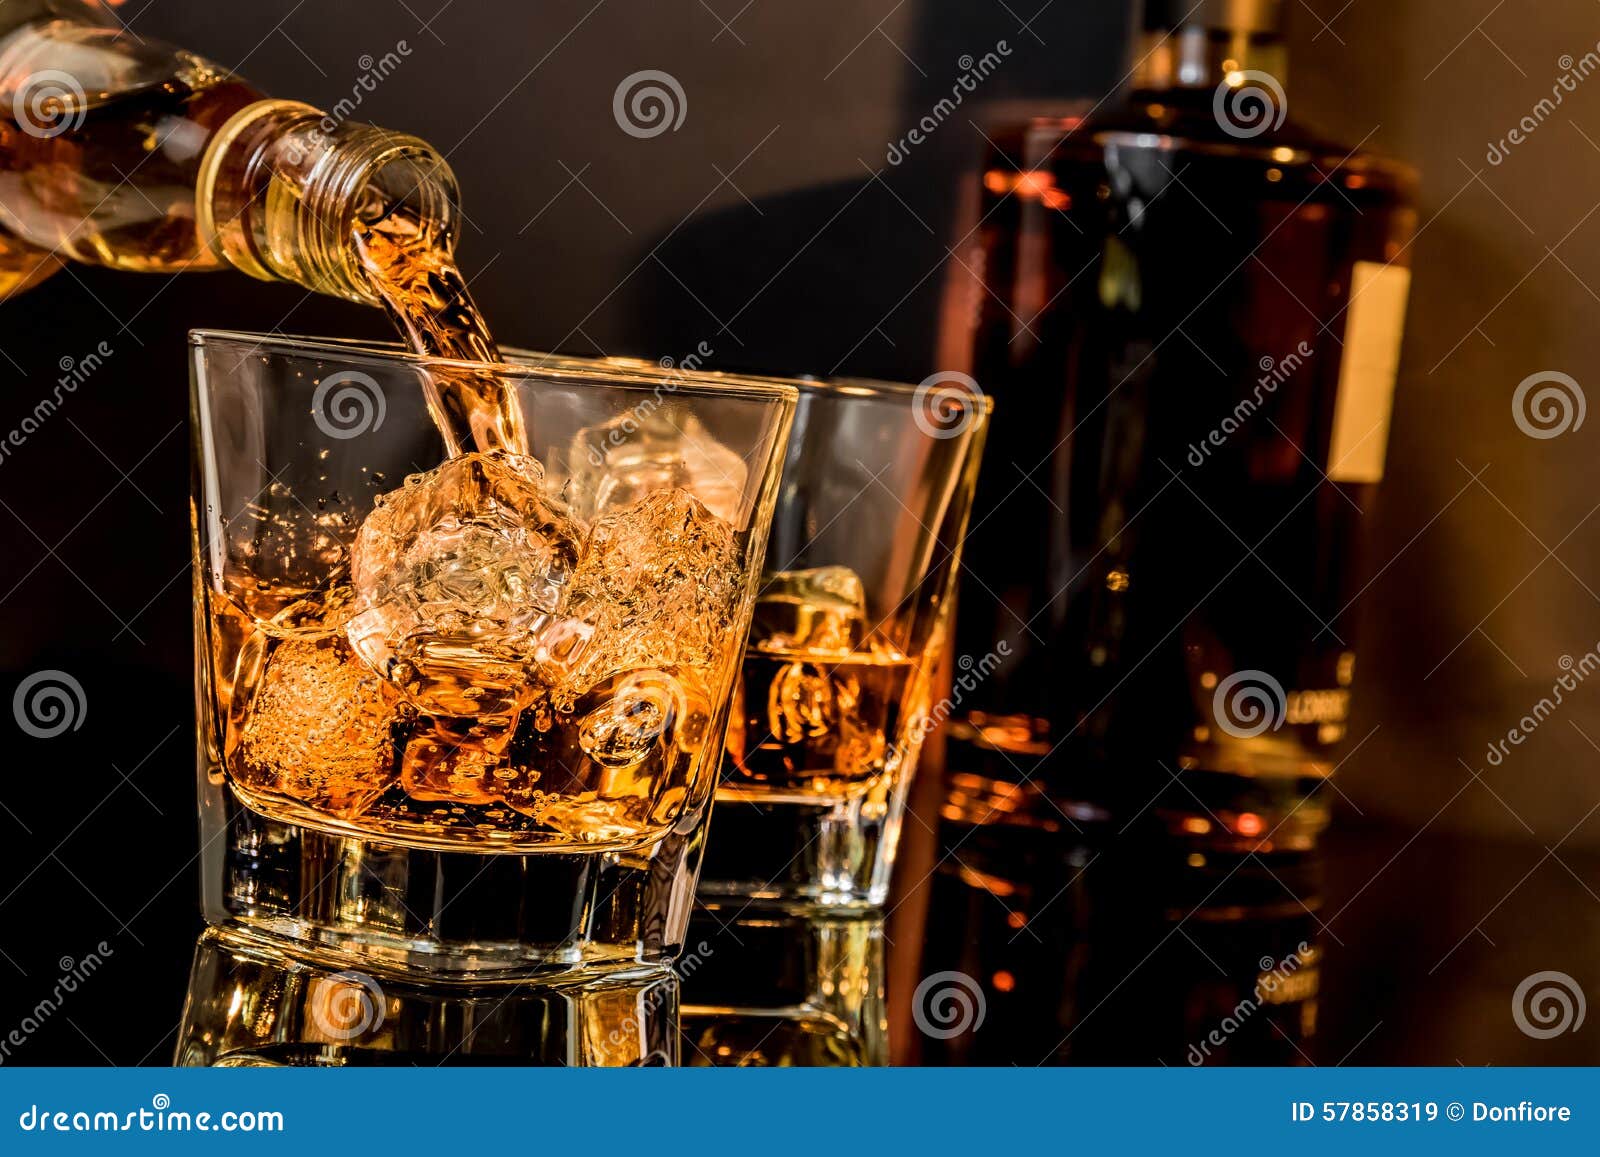 barman pouring whiskey in front of whiskey glass and bottles